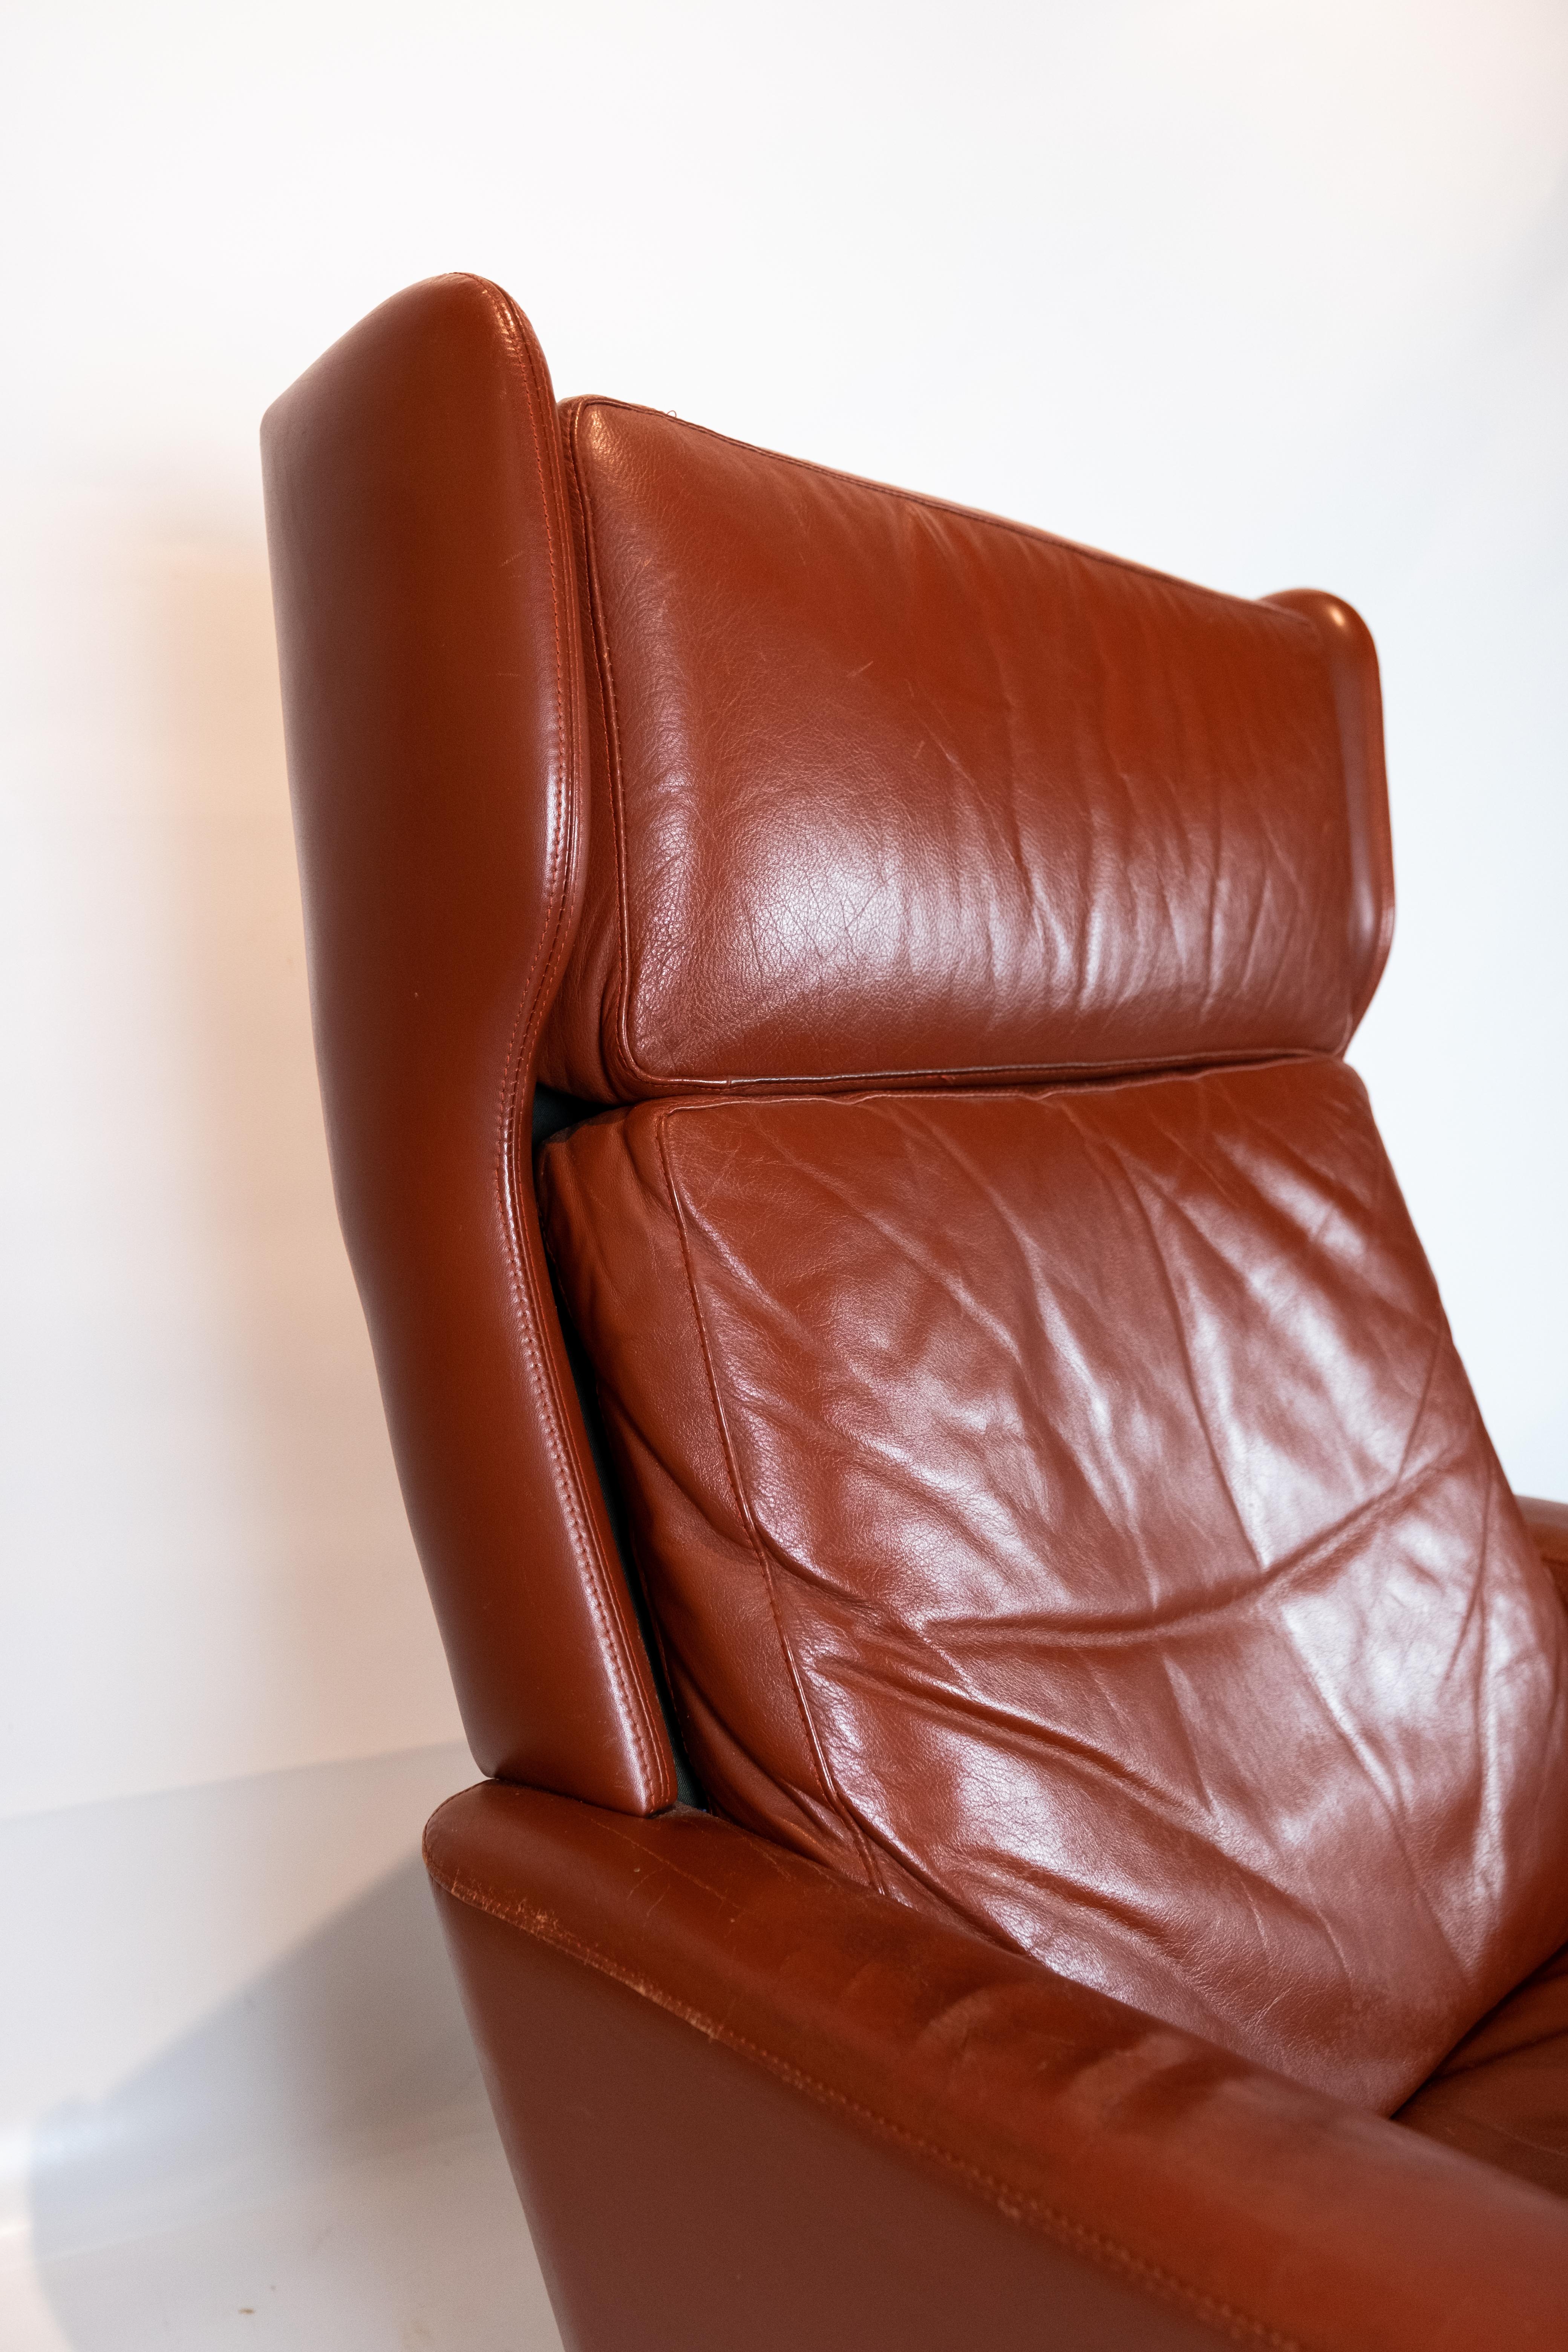 Easy chair upholstered with red brown elegance leather of Danish design from the 1970s. The chair is in great vintage condition.
 